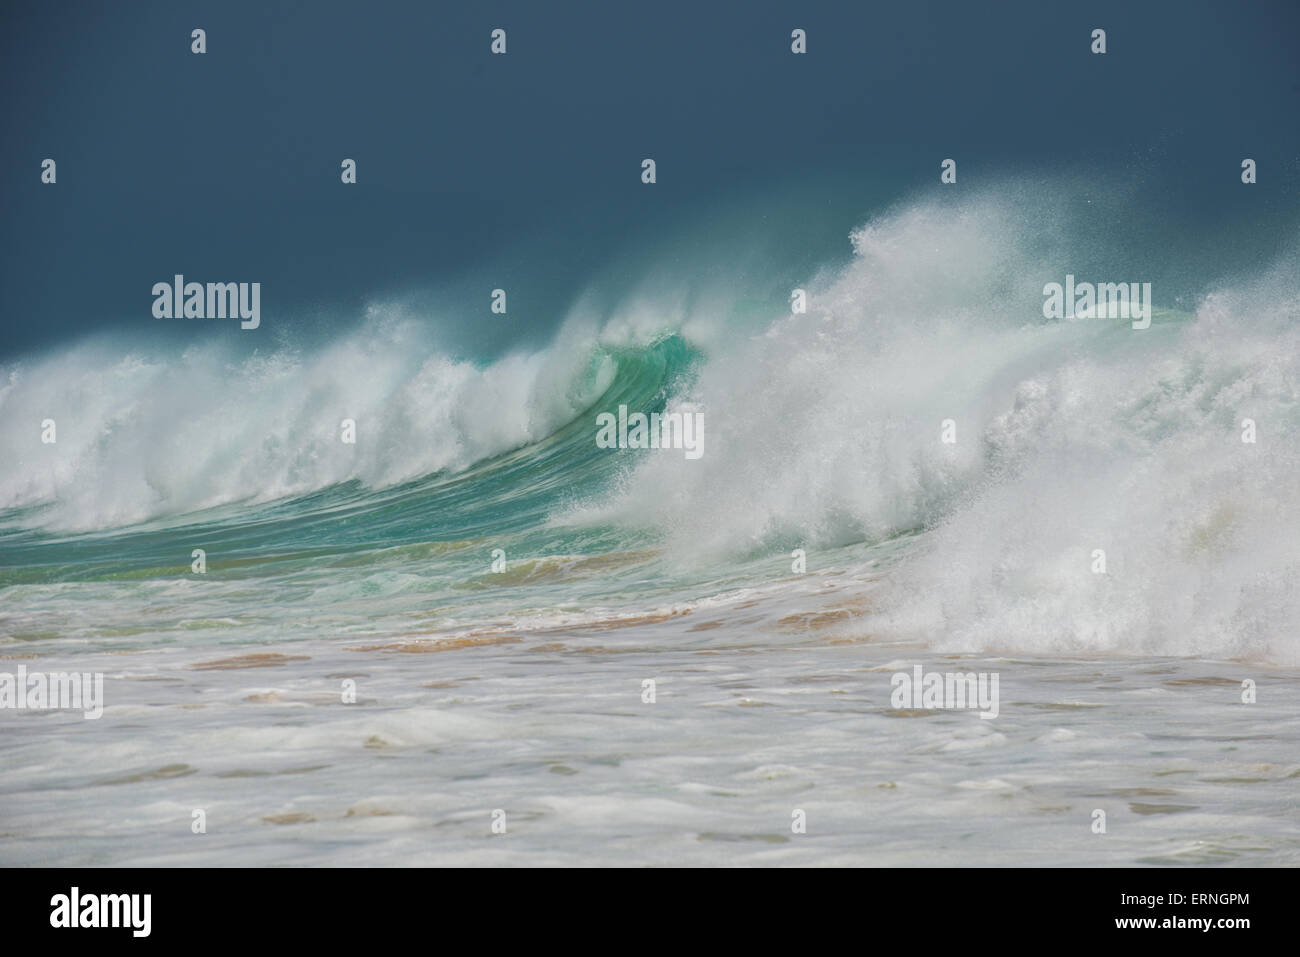 Spectacular waves on the beach of Cabo Verde Stock Photo